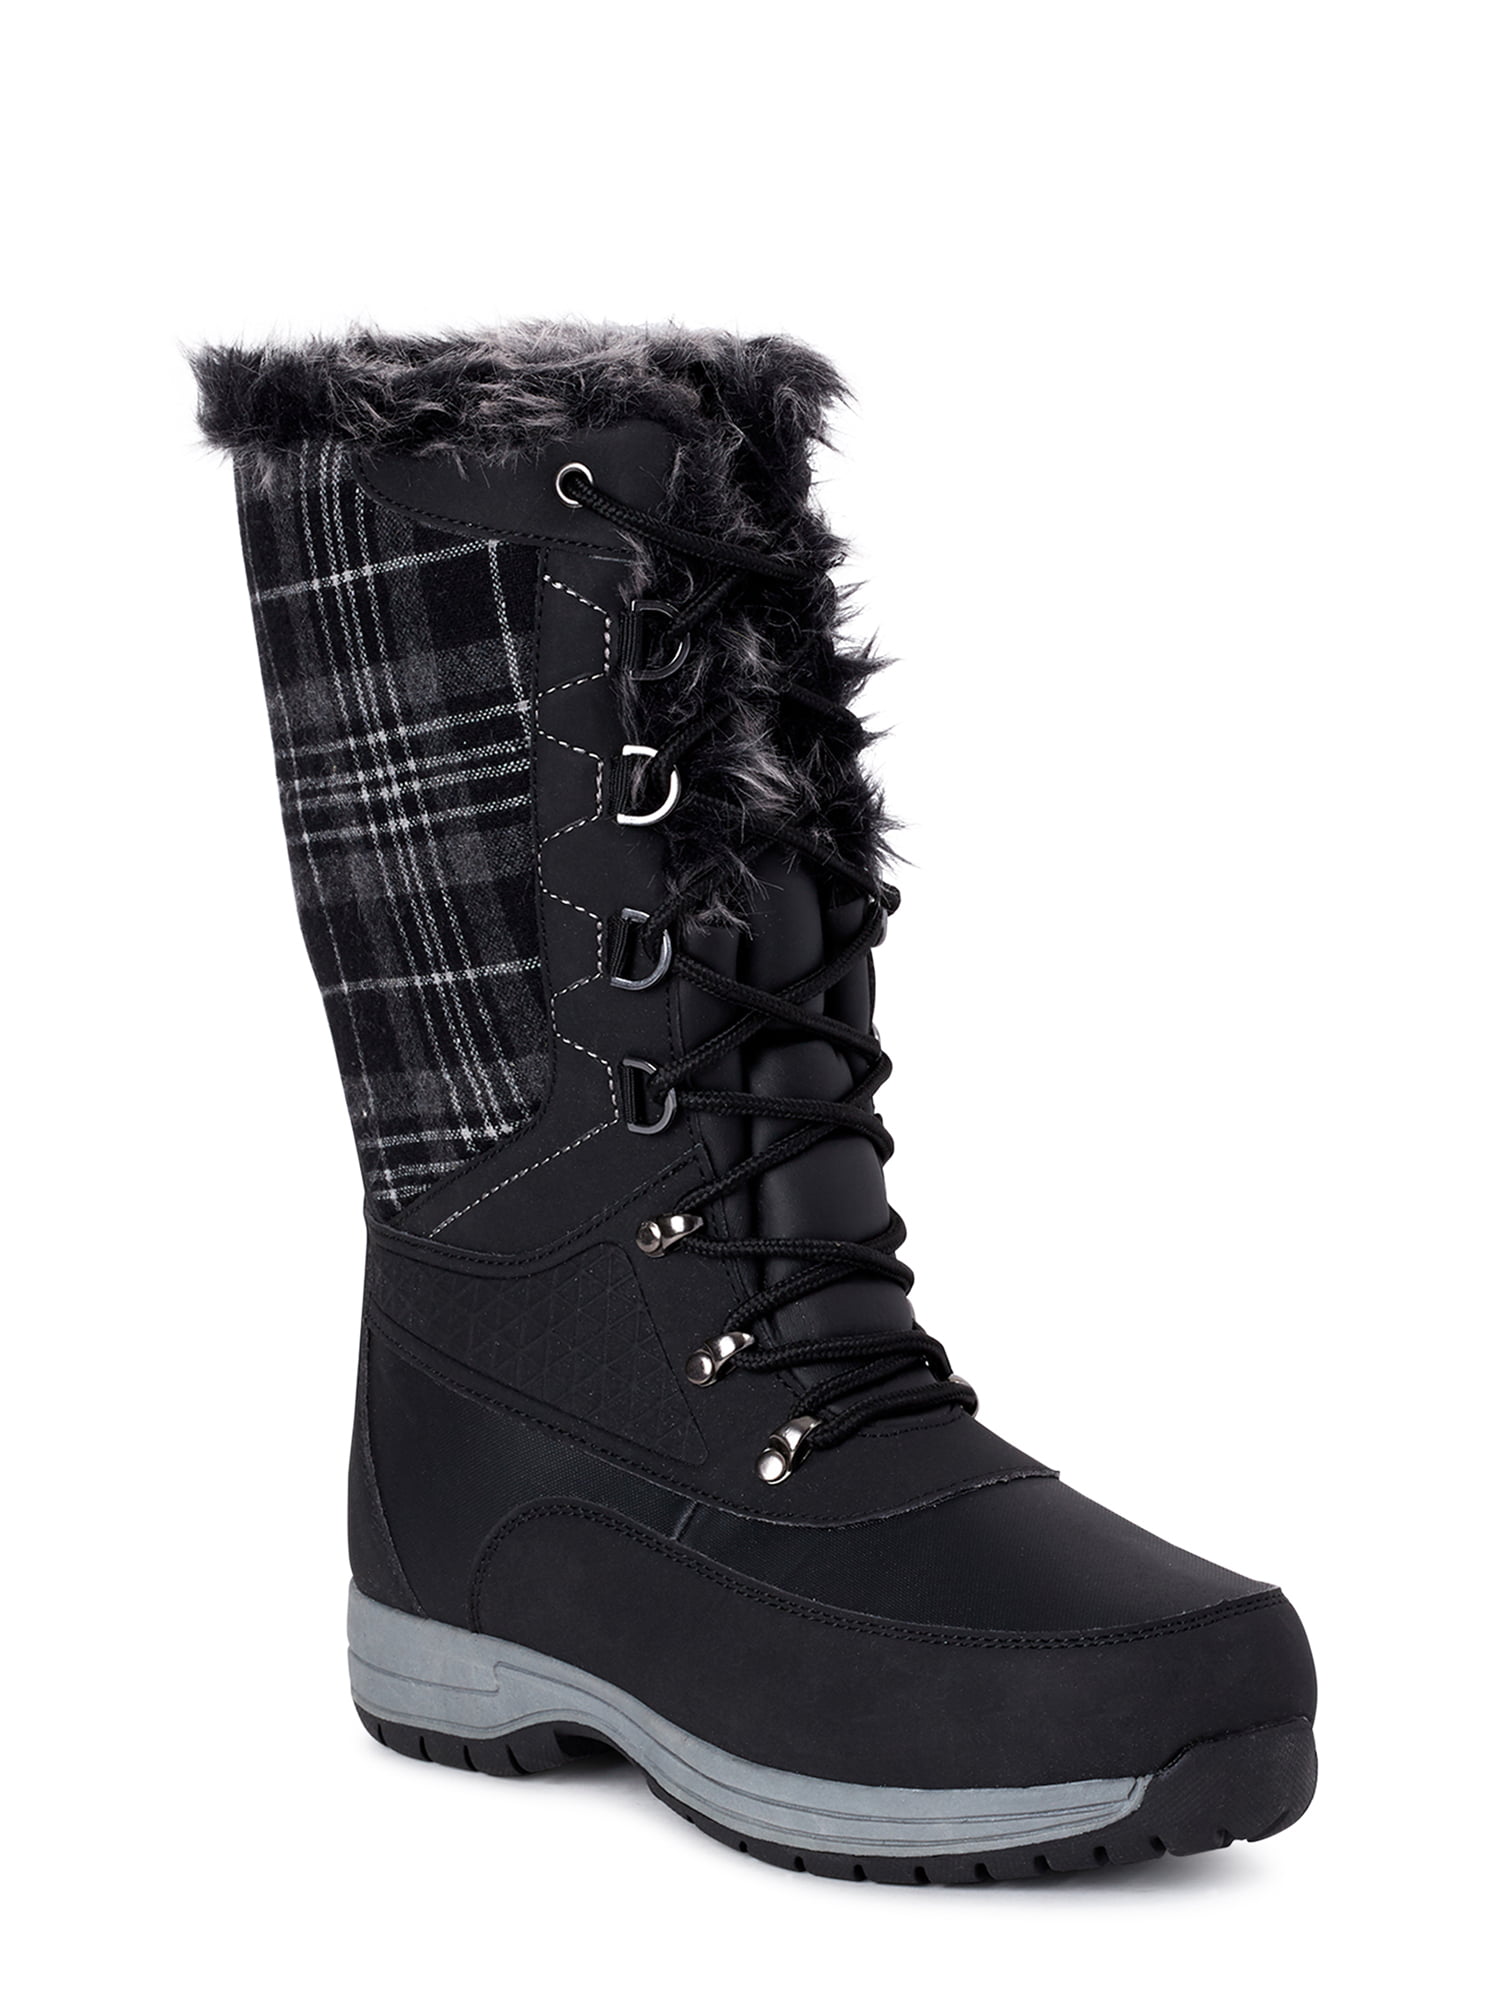 Buy > truworths ladies winter boots > in stock